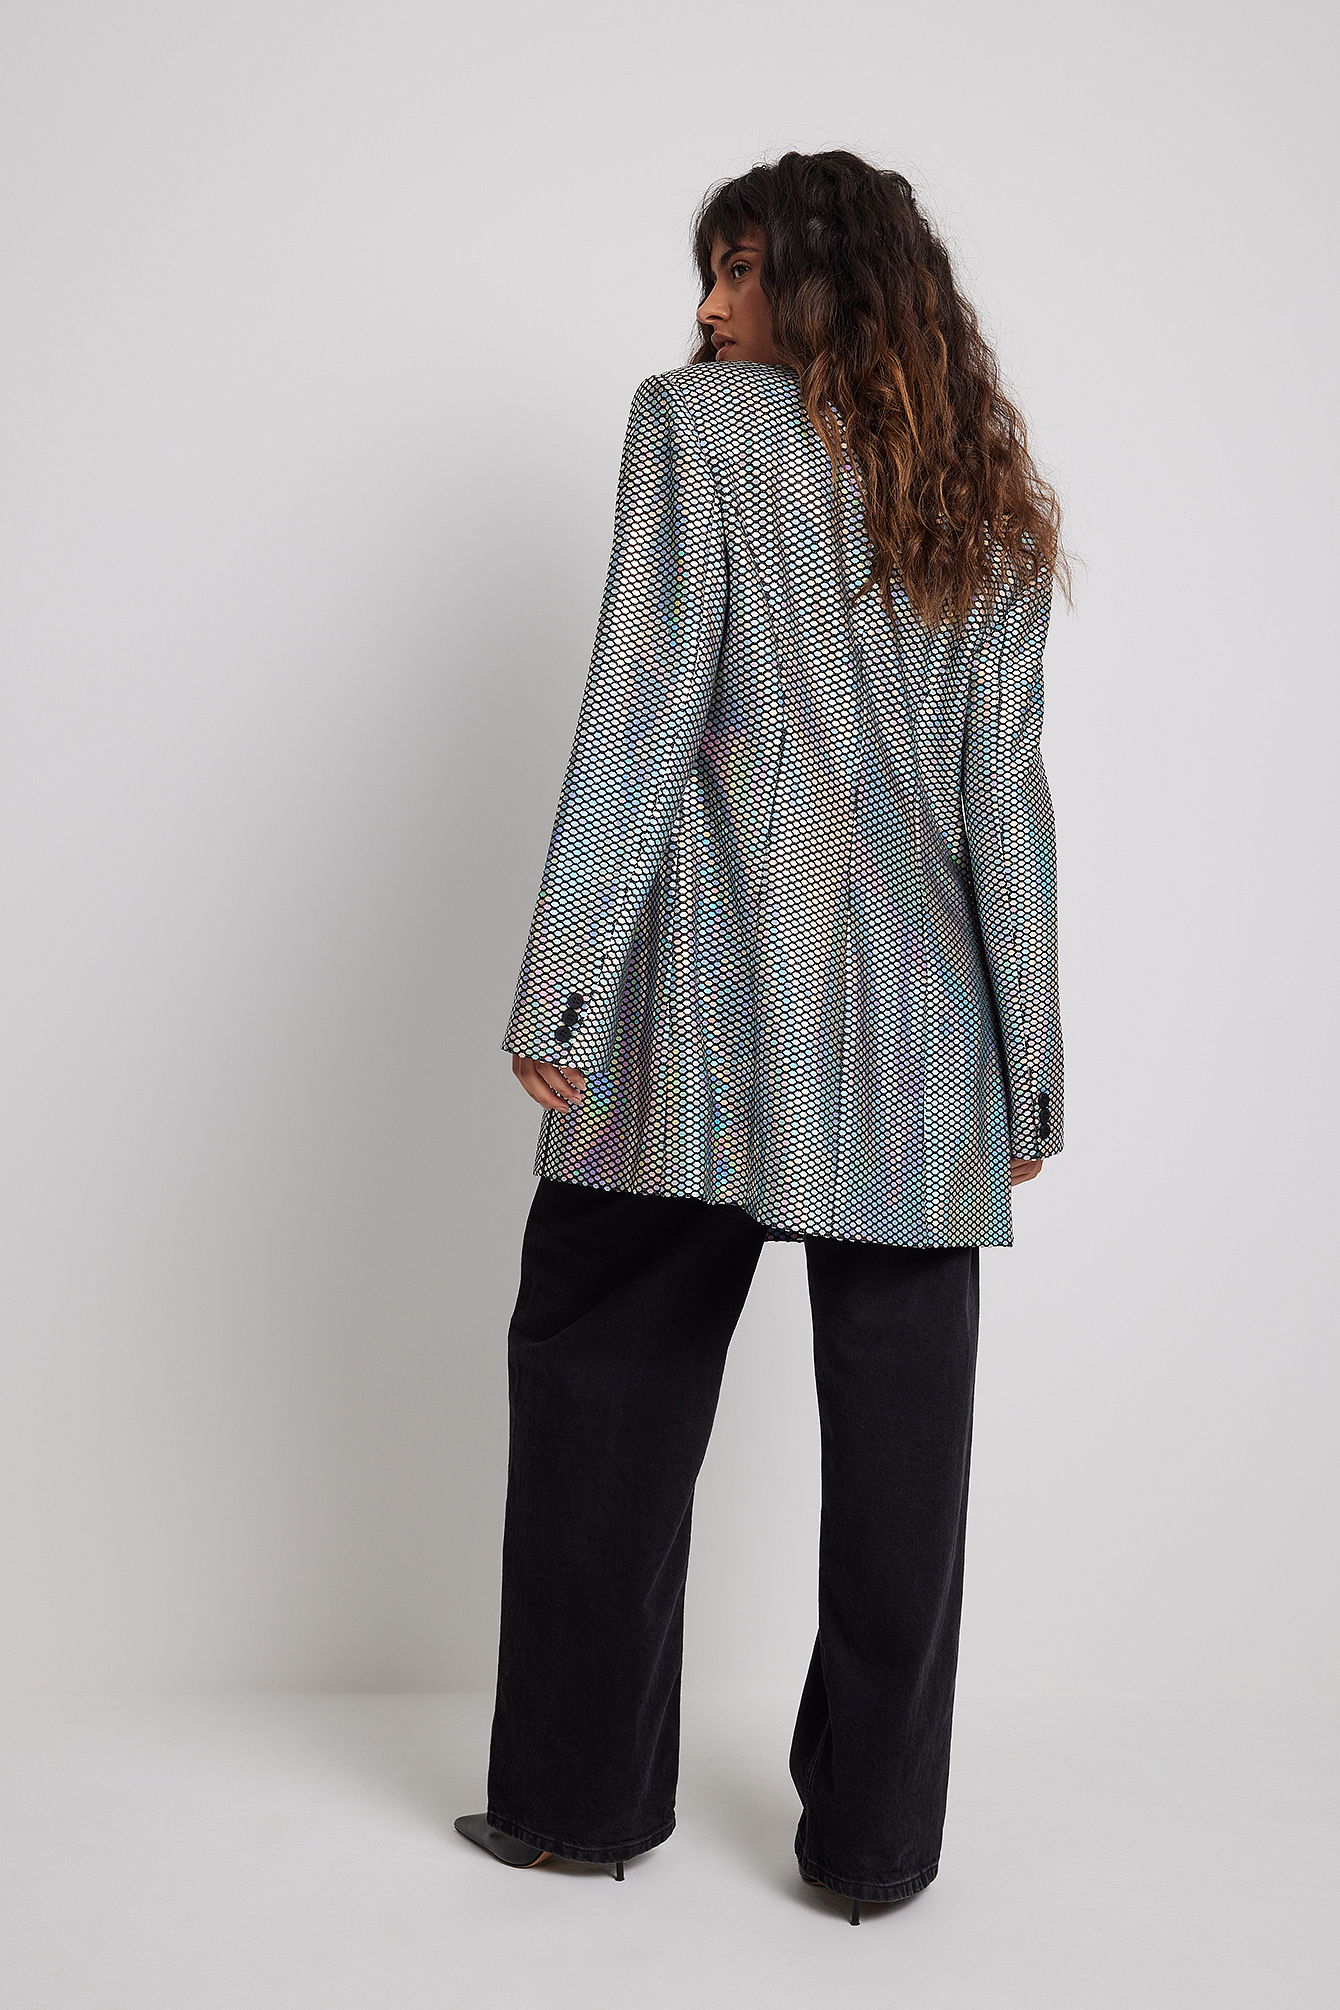 & other stories Slip-over blouse blauw-wit gestreept patroon casual uitstraling Mode Blouses Slip-over blouses 